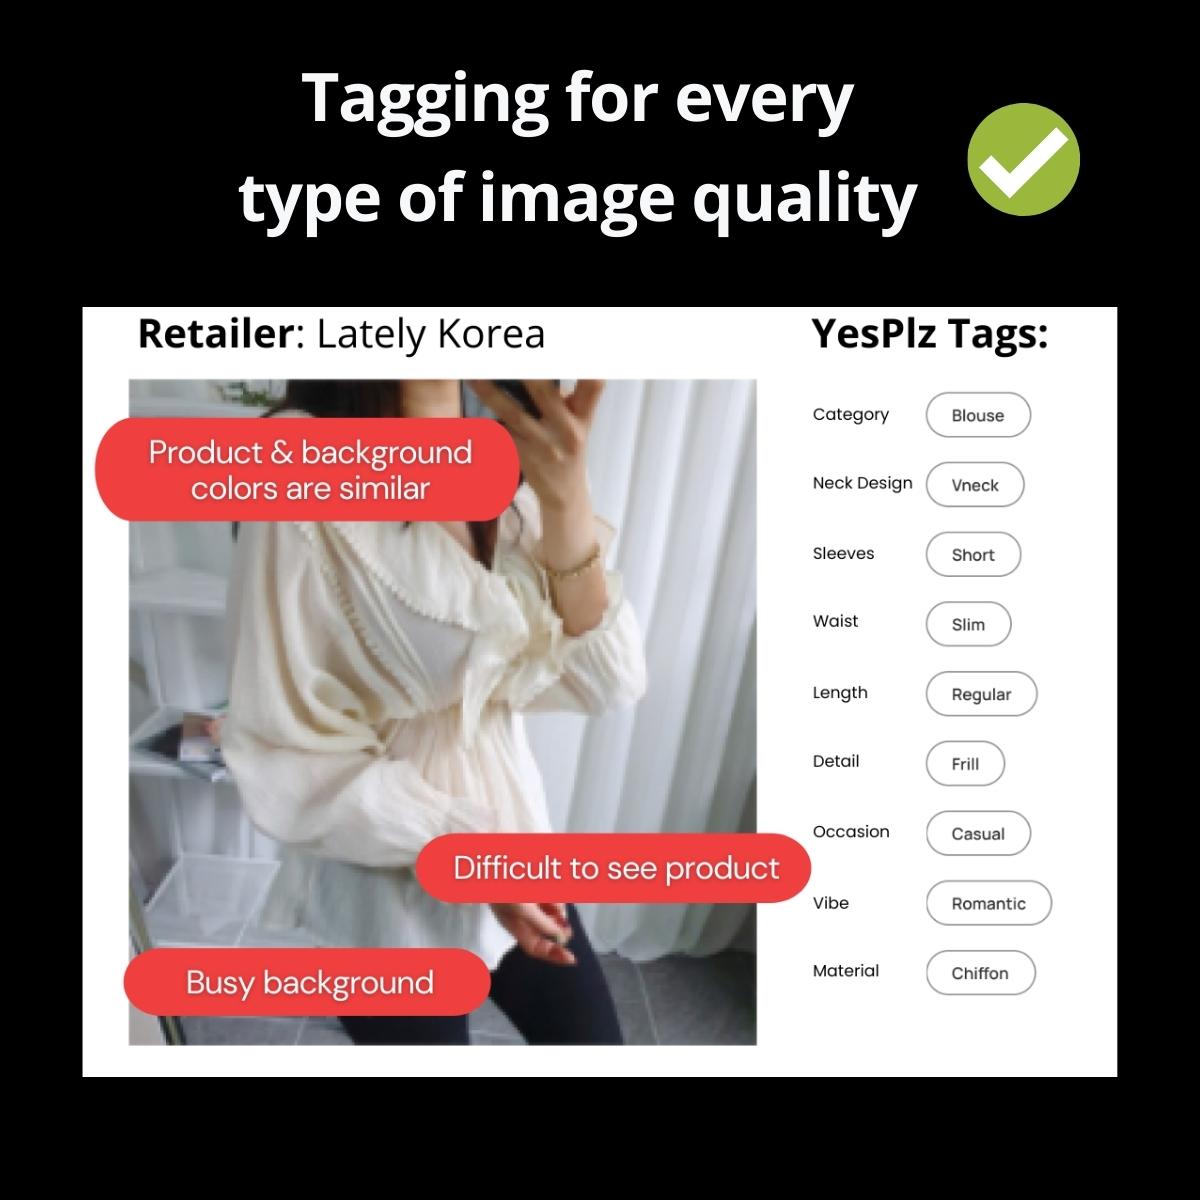 YesPlz fashion tagging tool is able to adjust to any image quality